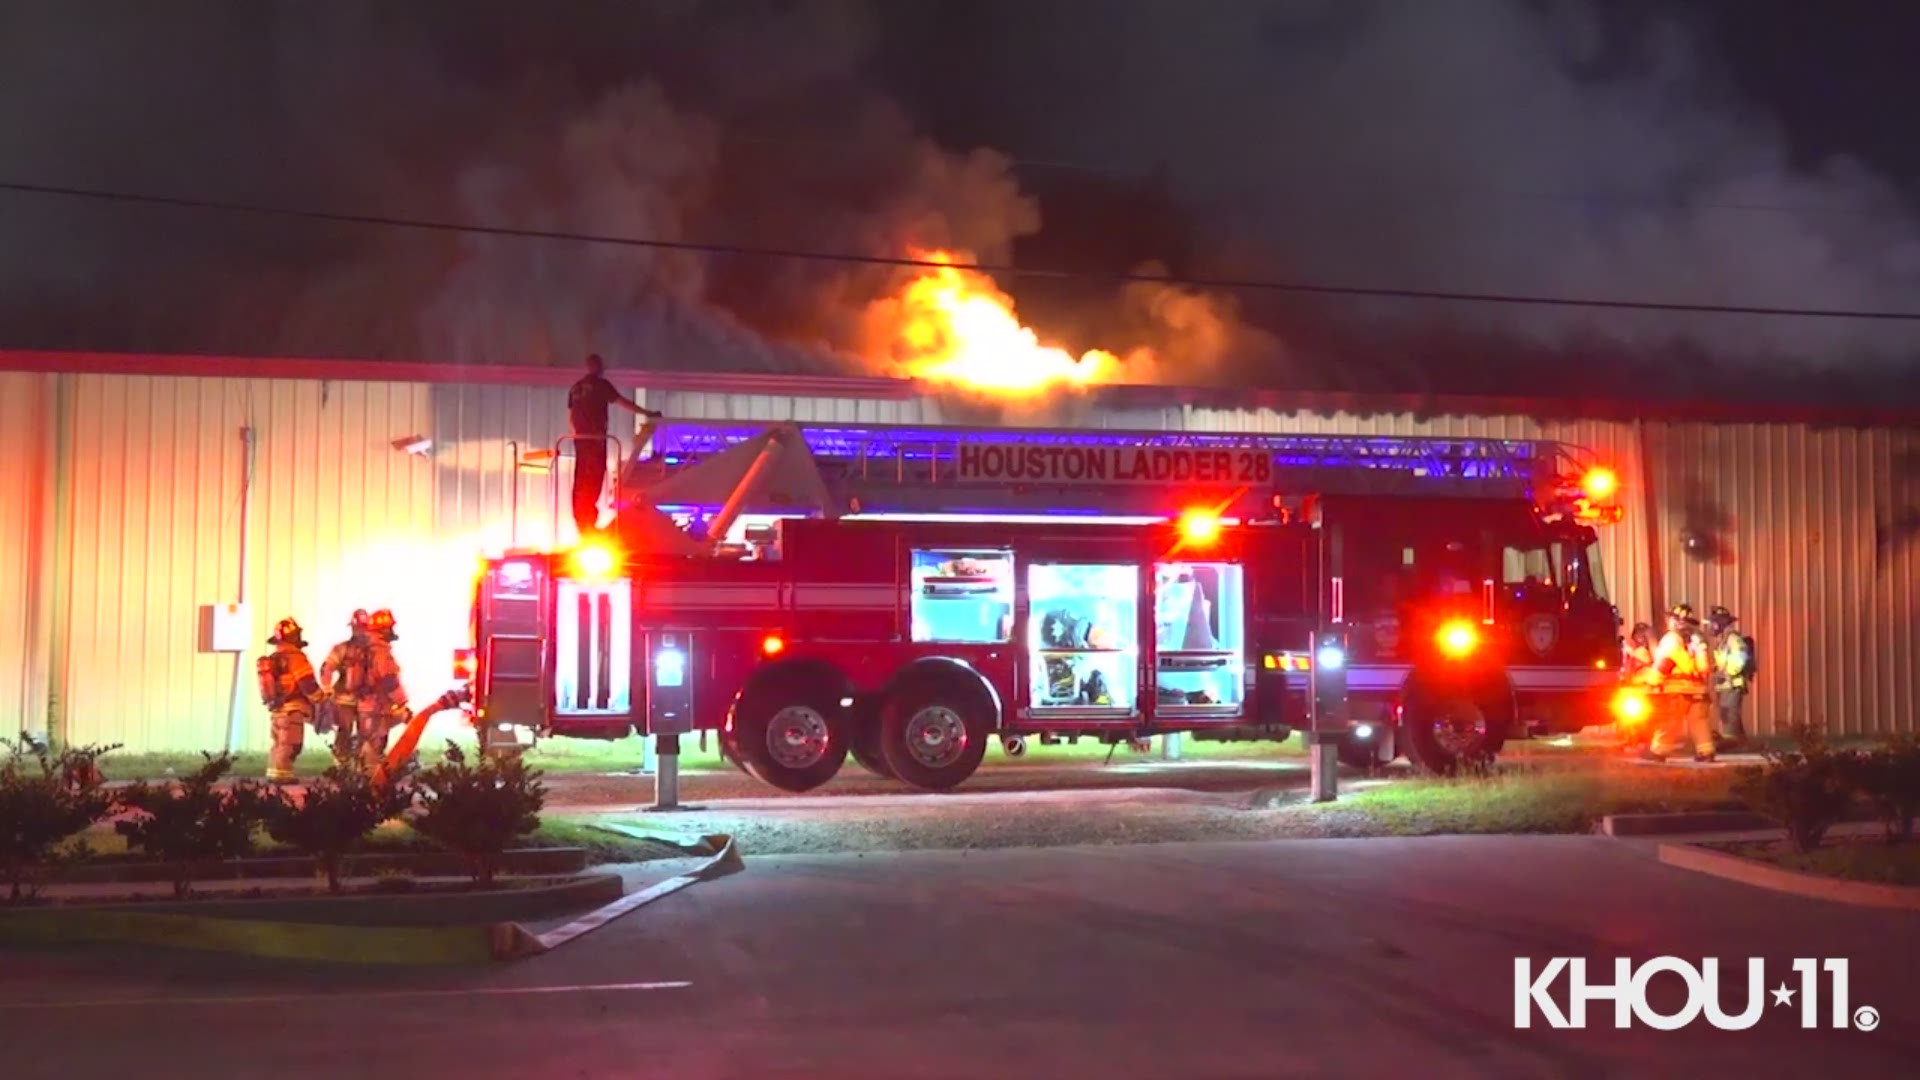 Firefighters responded to a two-alarm building fire at a business located just off the Westpark Tollway early Monday.